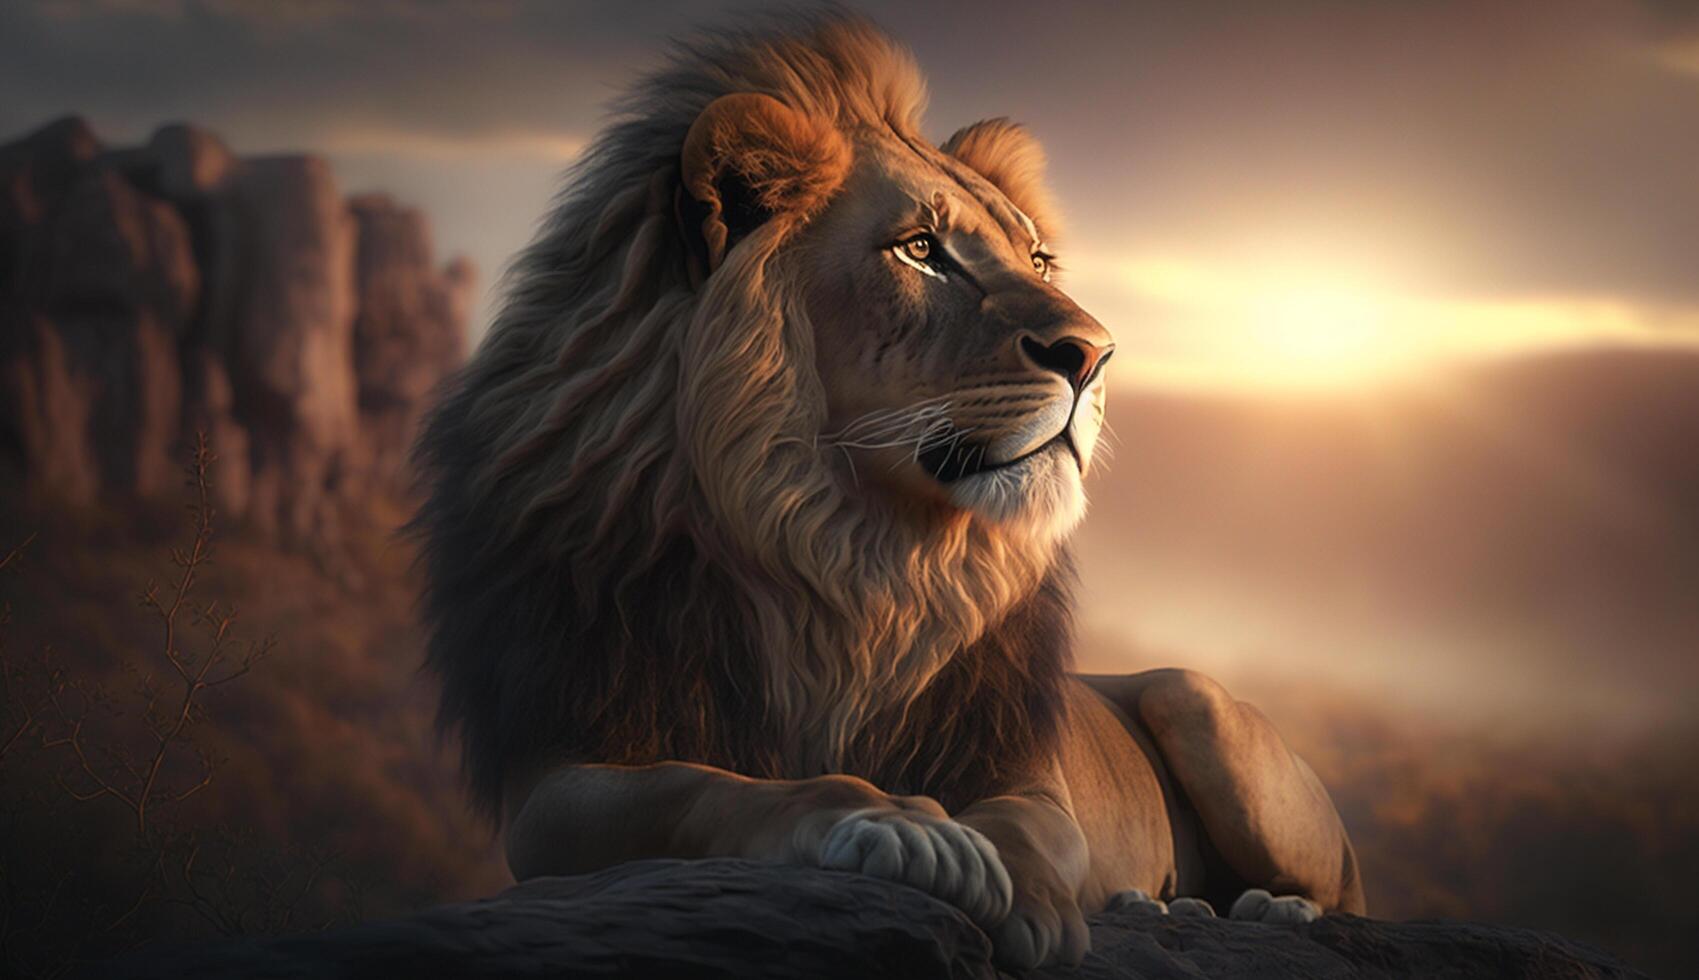 Lion Pride Stock Photos, Images and Backgrounds for Free Download